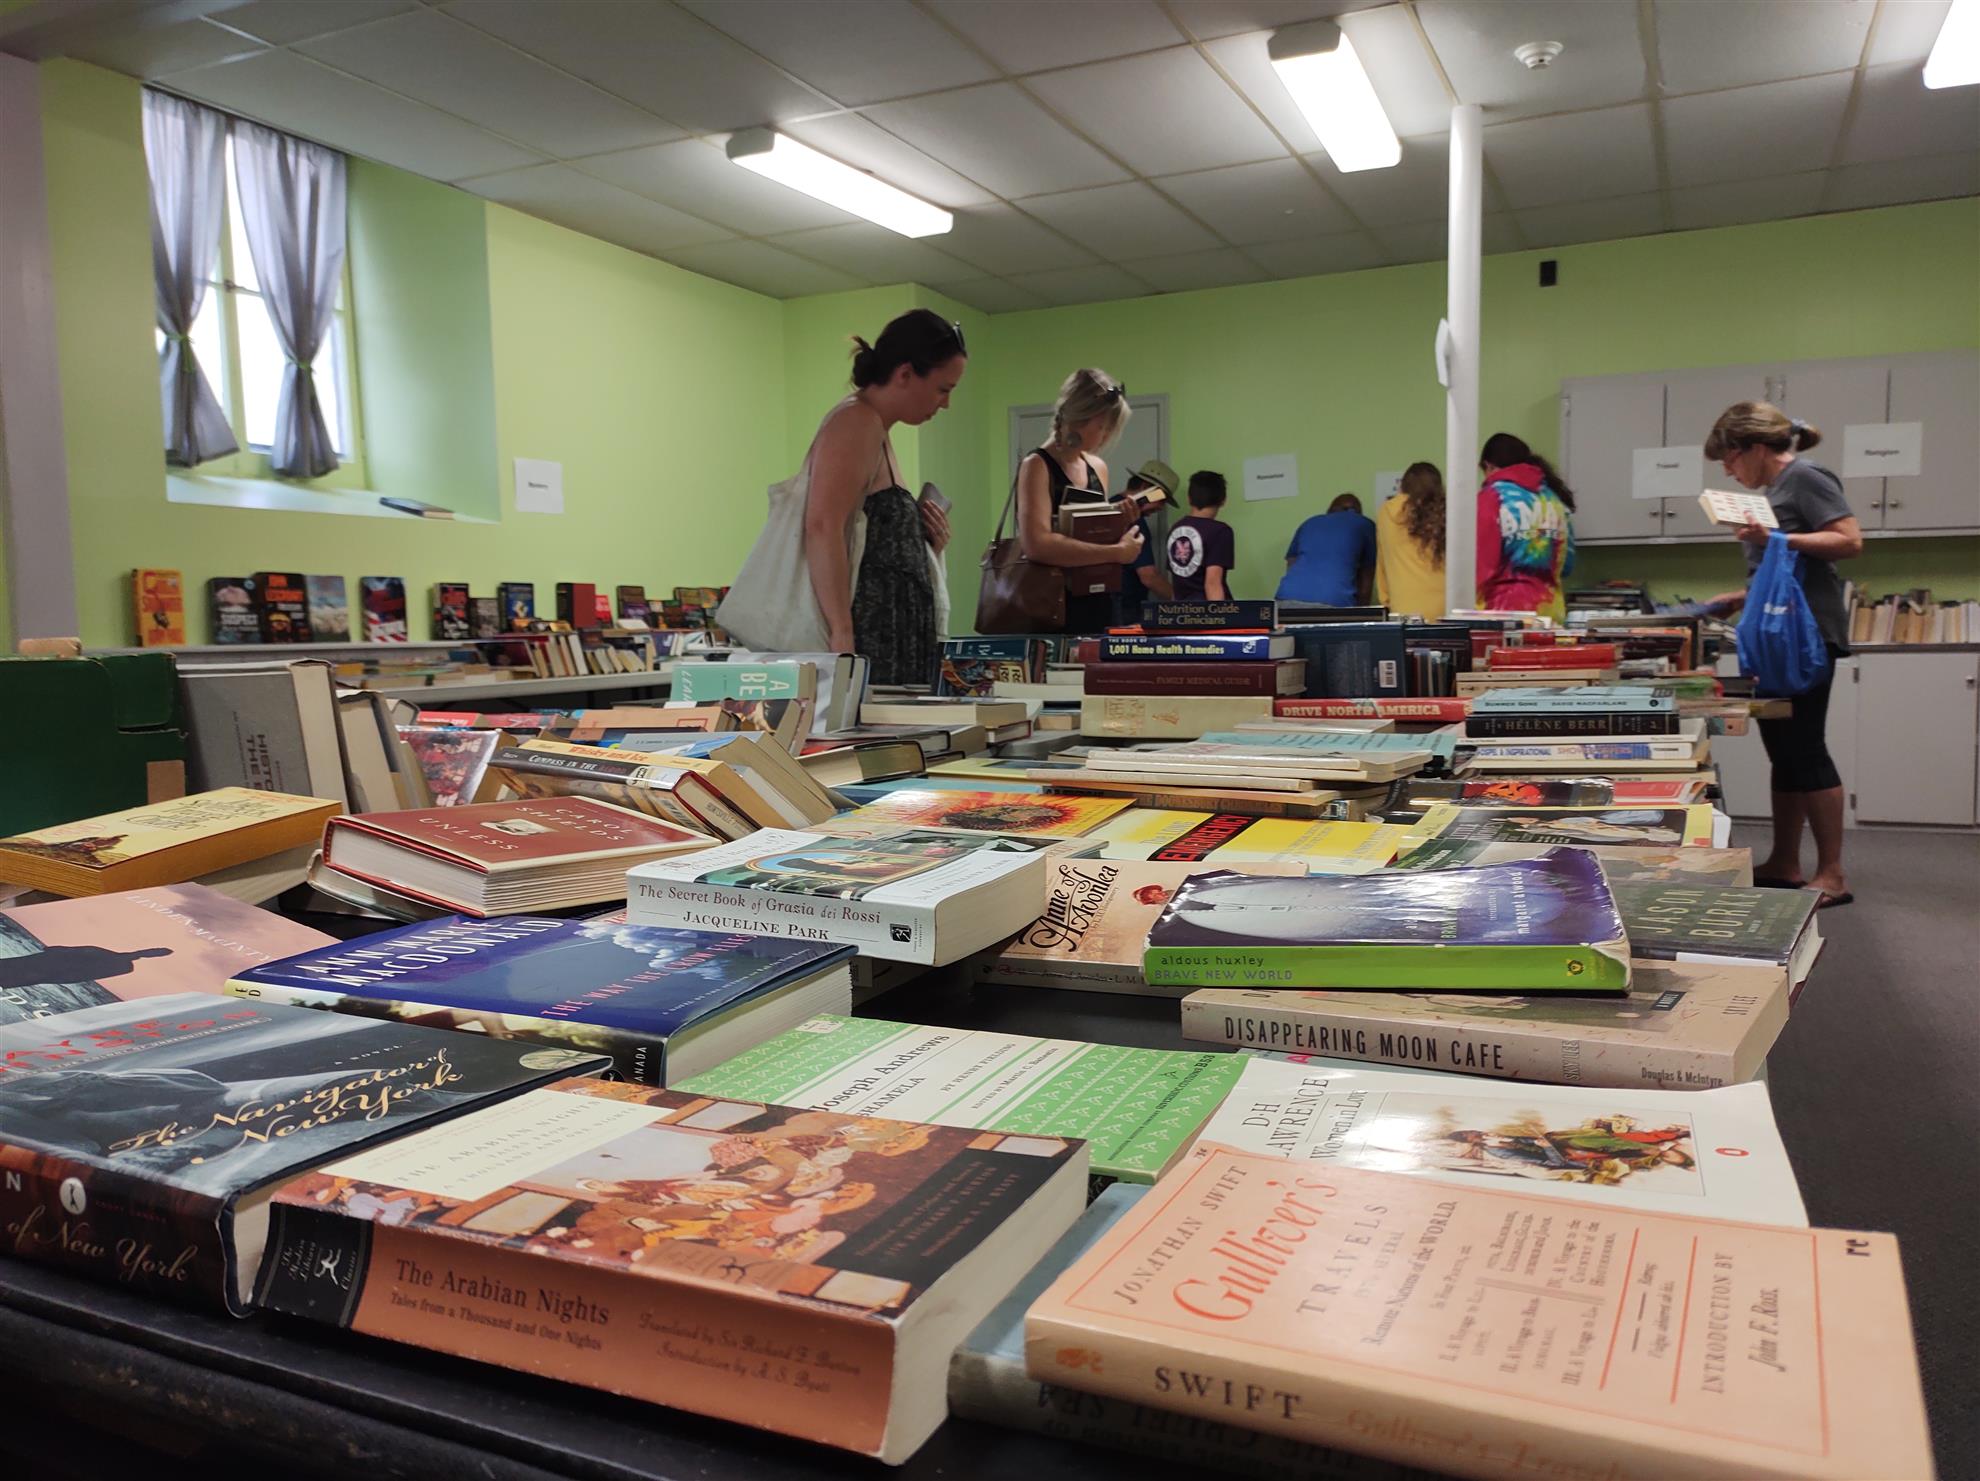 Seven people, including teens and adults, browse through tables filled with used books inside a church basement.